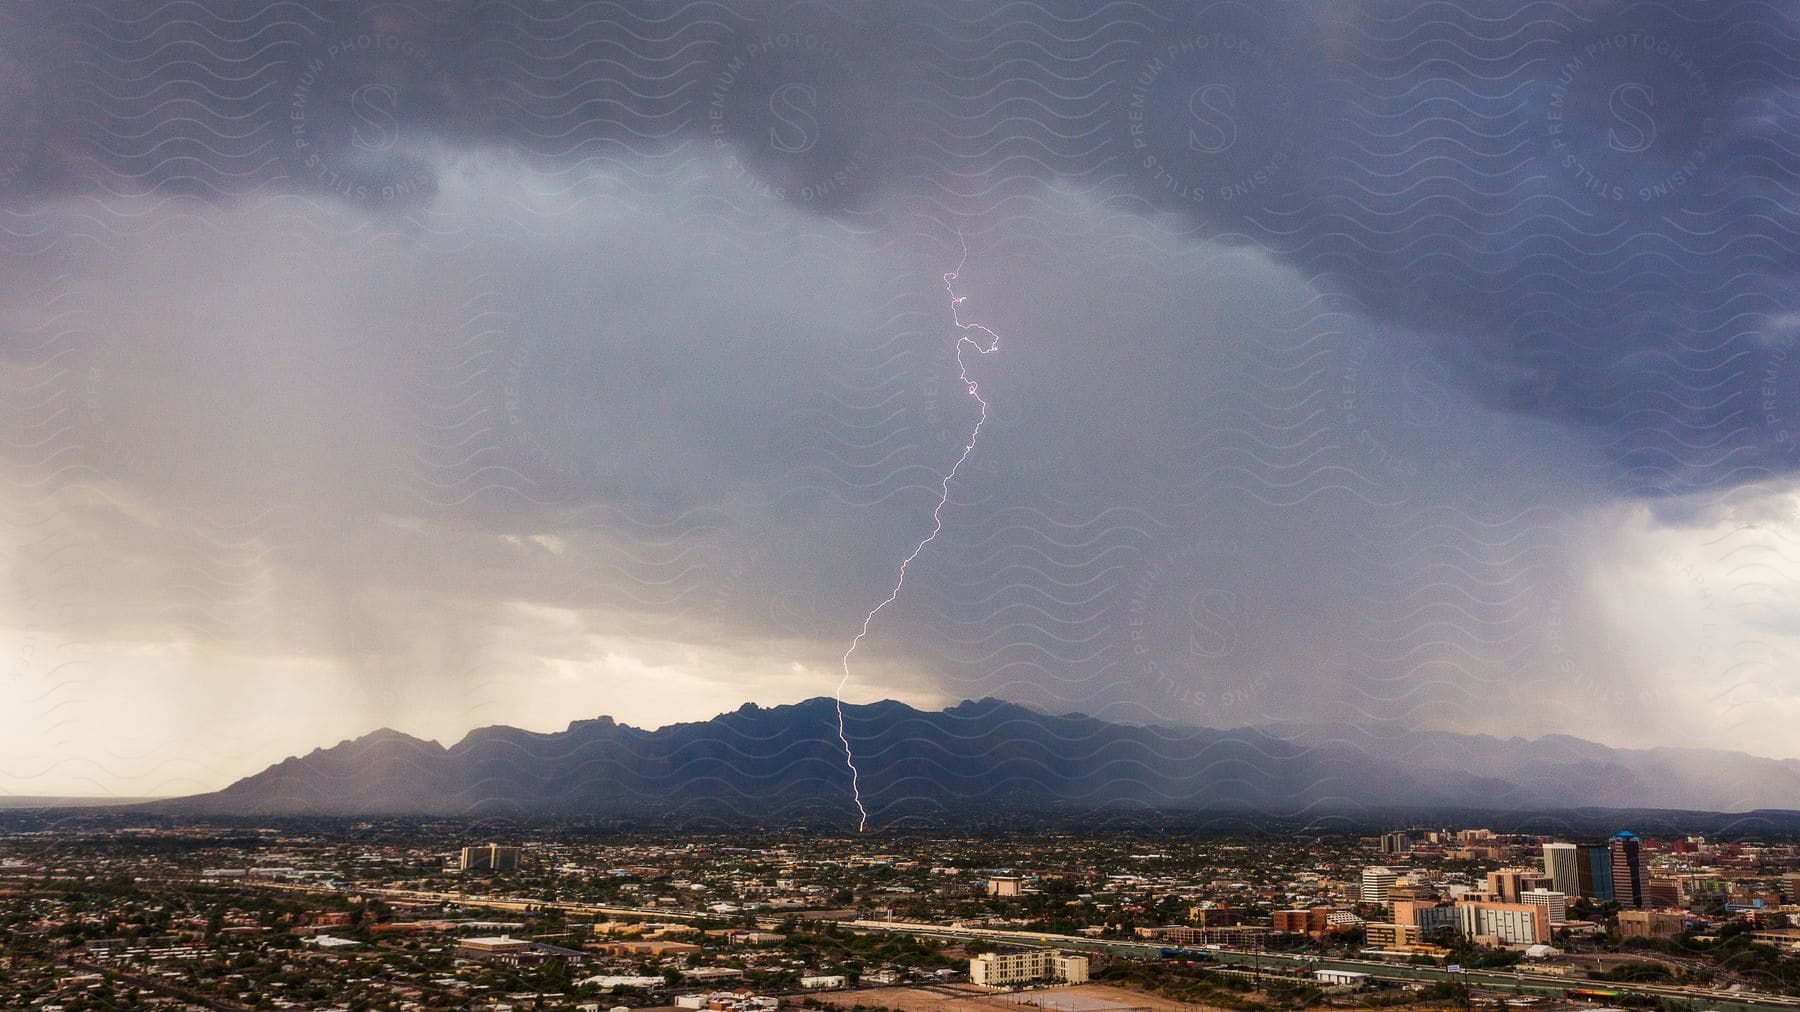 Stock photo of lightning bolt strikes near a town under thick clouds with mountains and bright sky in the background at dusk